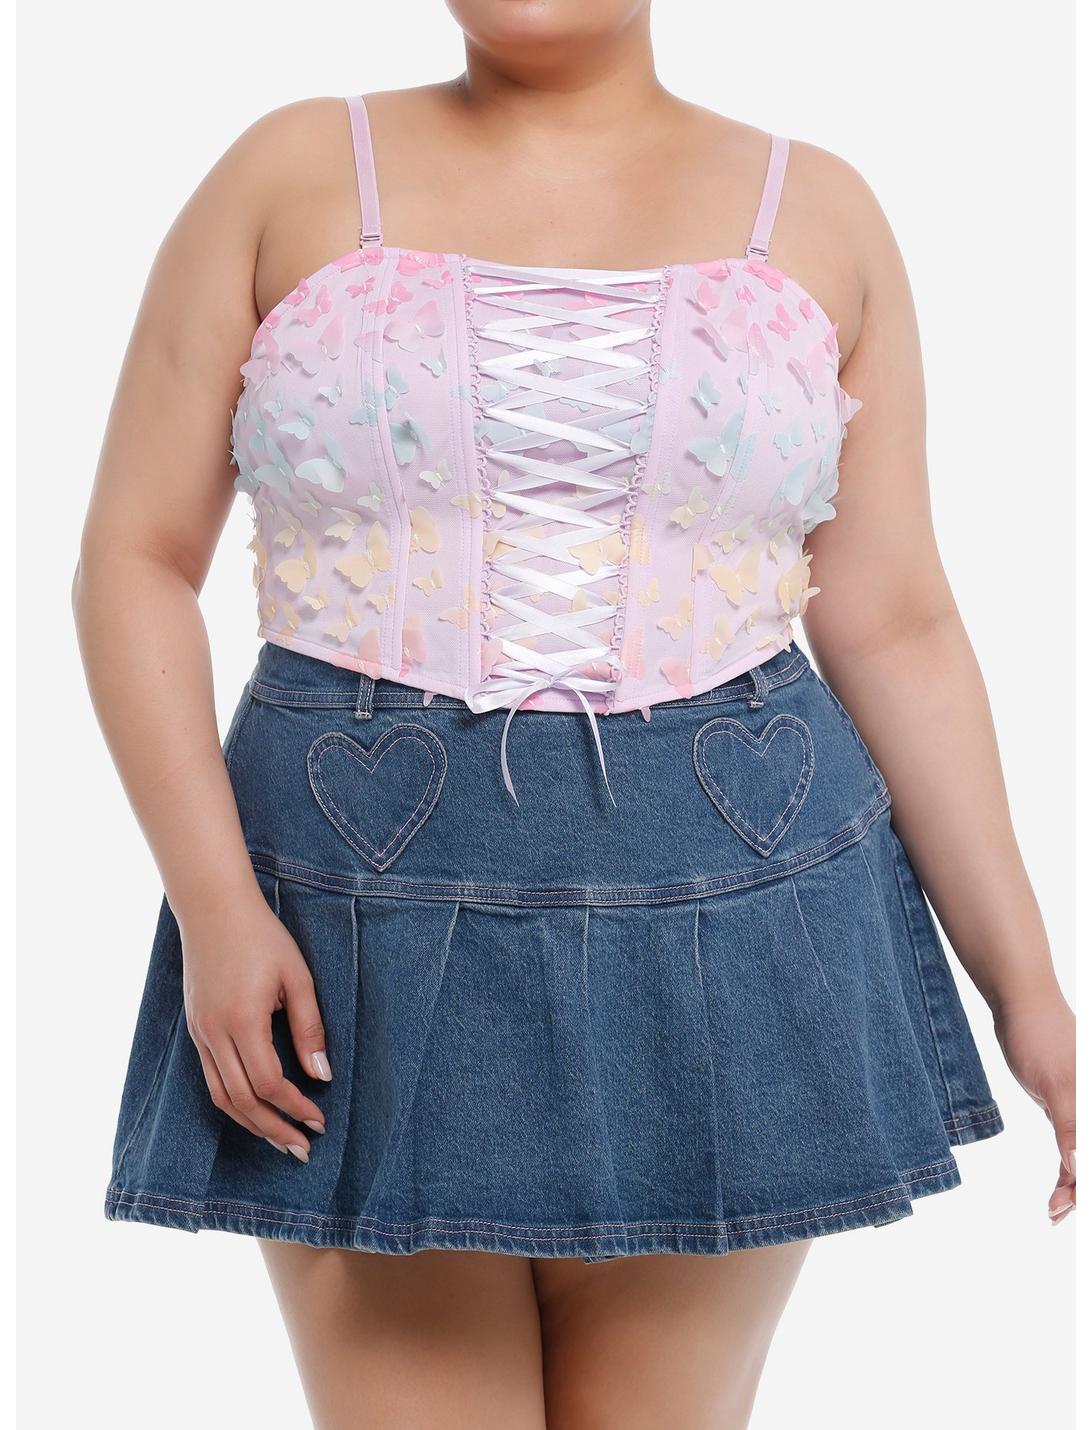 Thorn & Fable® Rainbow Butterfly Pastel Lace-Up Girls Corset Cami Plus Size, MULTI, hi-res